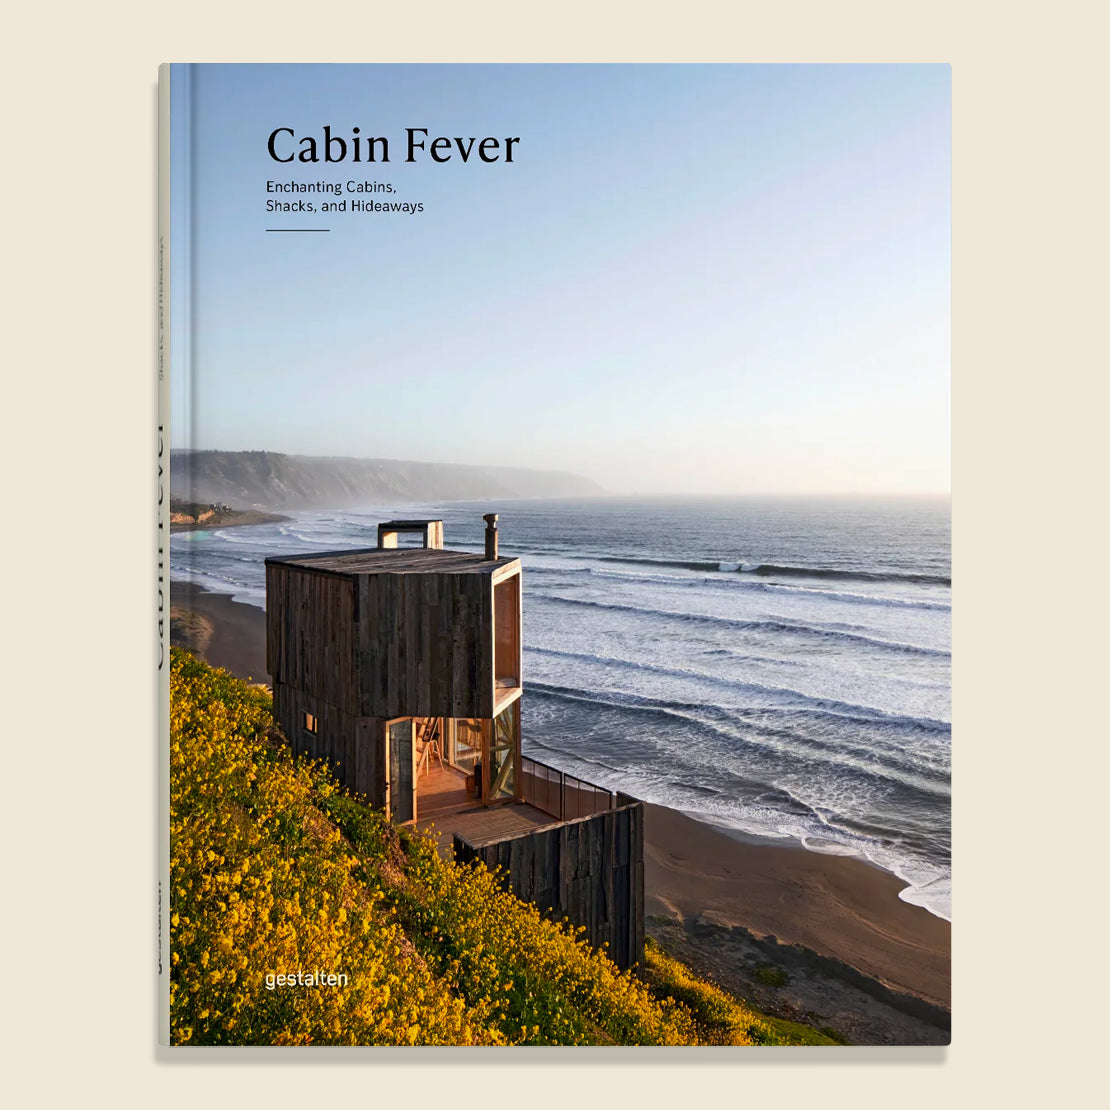 Bookstore Cabin Fever: Enchanting Cabins, Shacks, and Hideaways